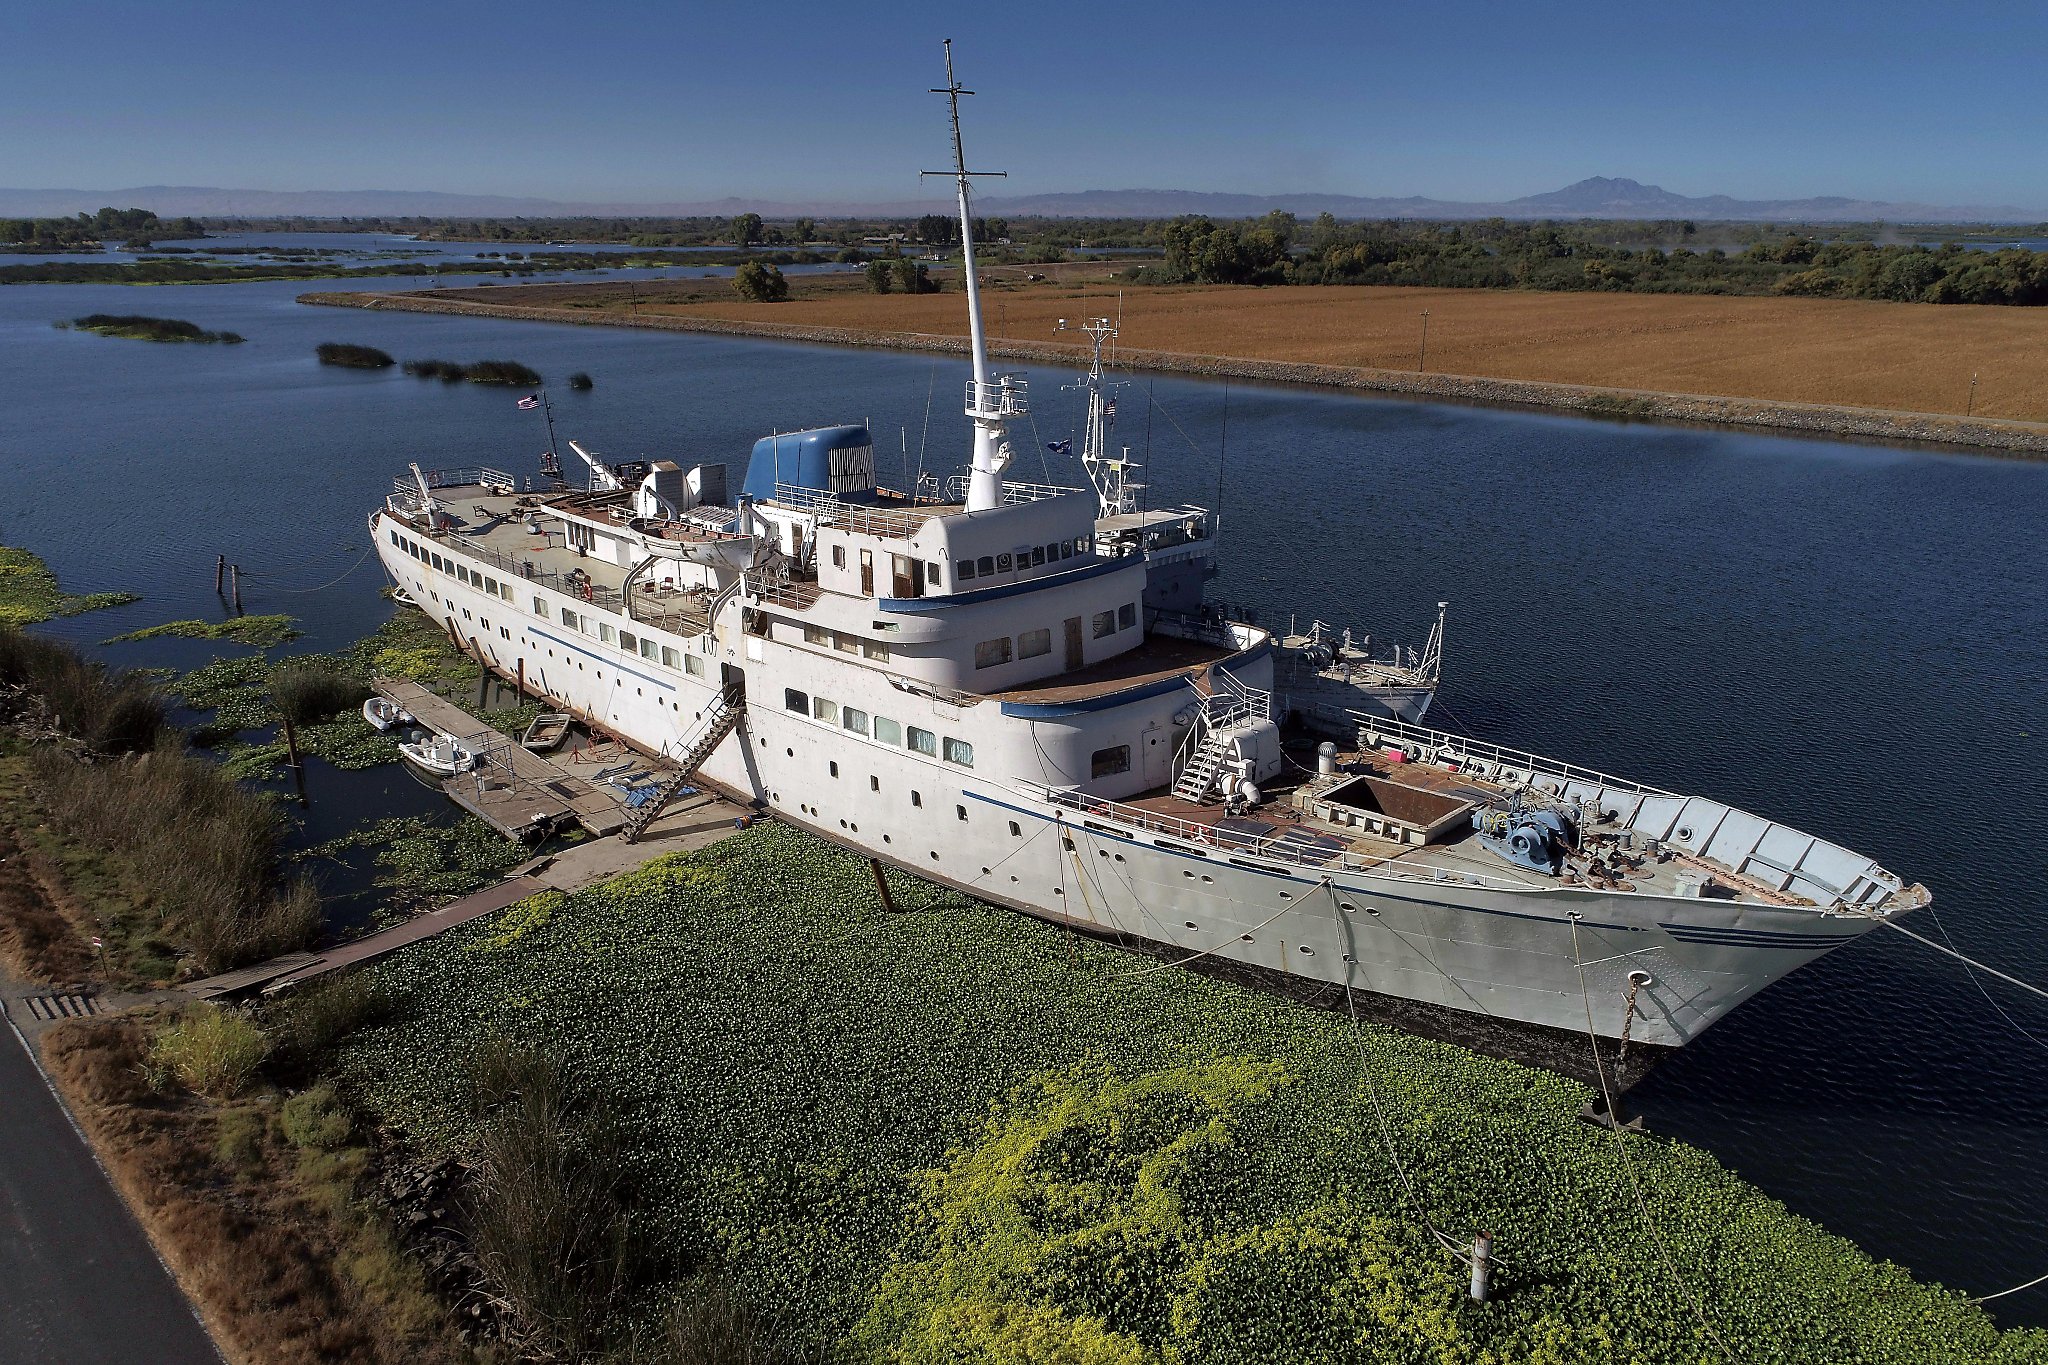 He lives in a 65-year-old cruise ship idling in the California Delta photo photo